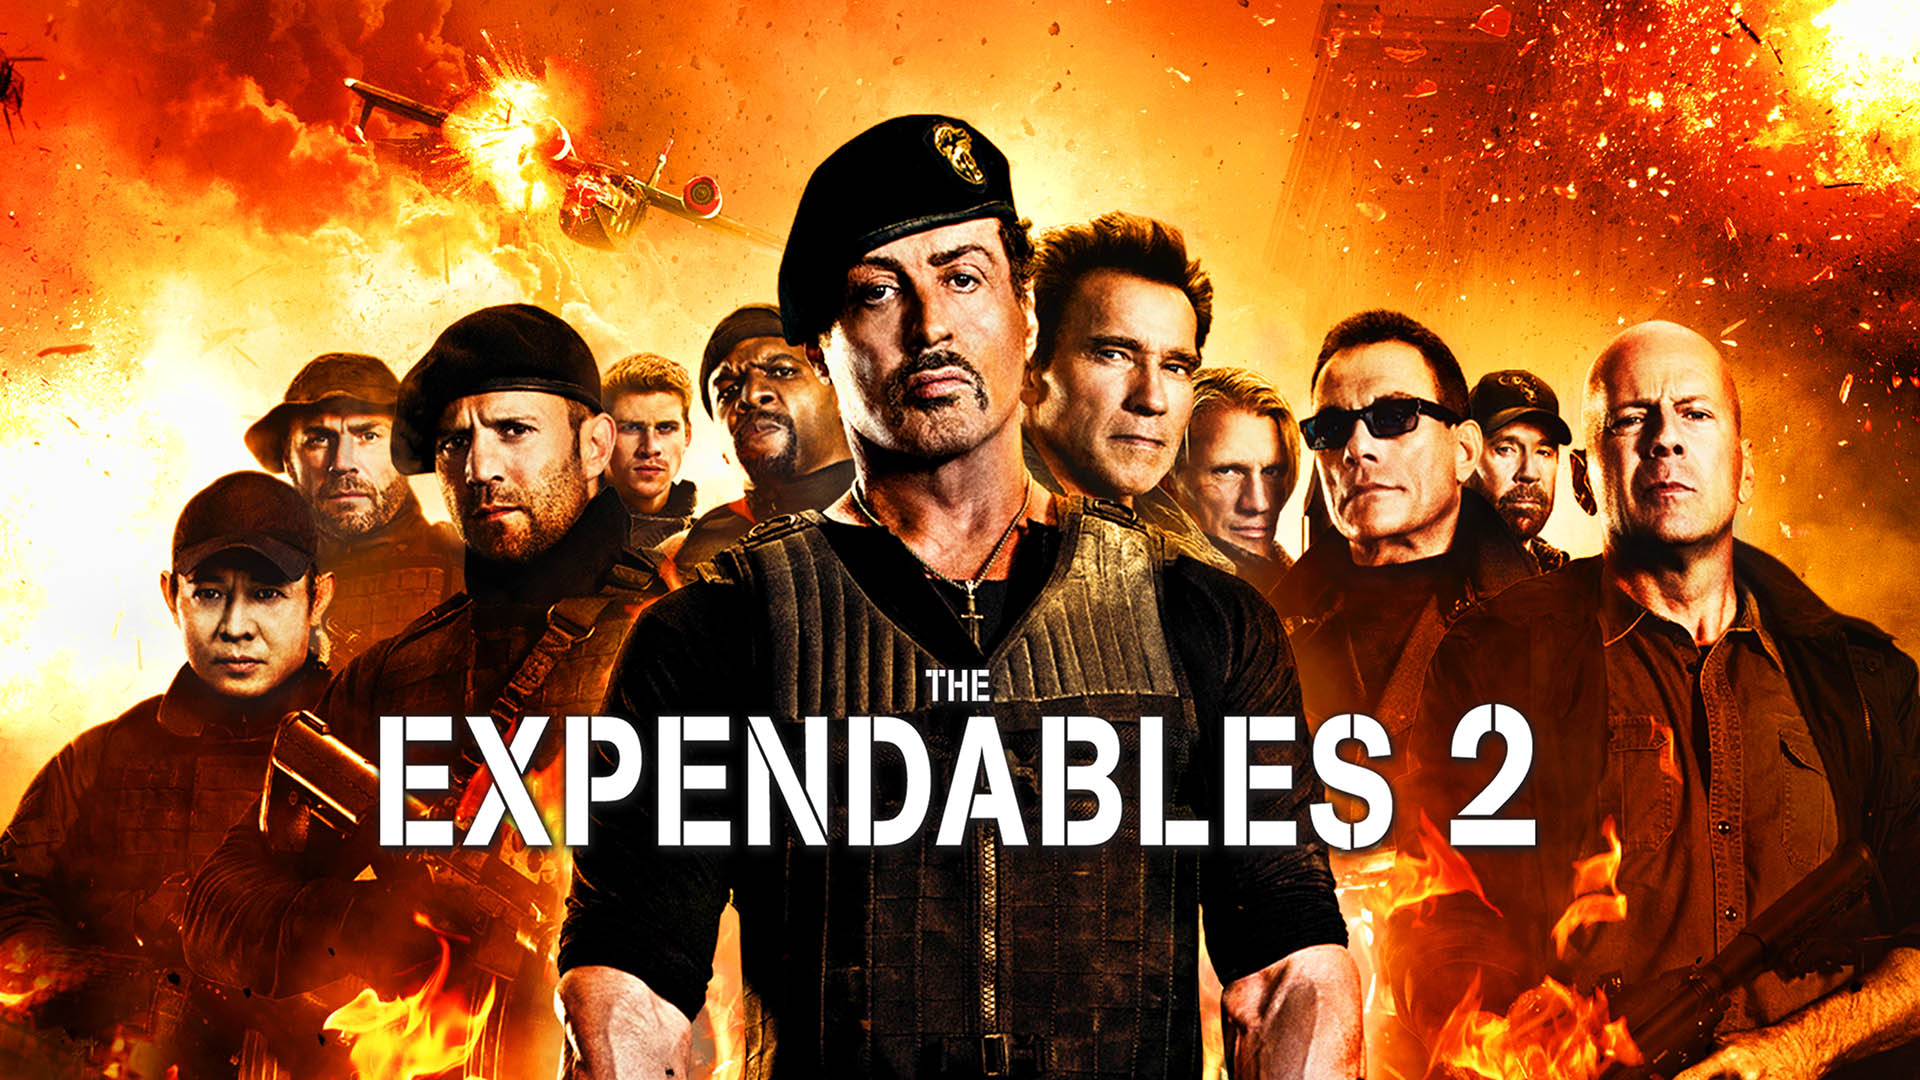 Watch The Expendables 2 Online | Stream Full Movies